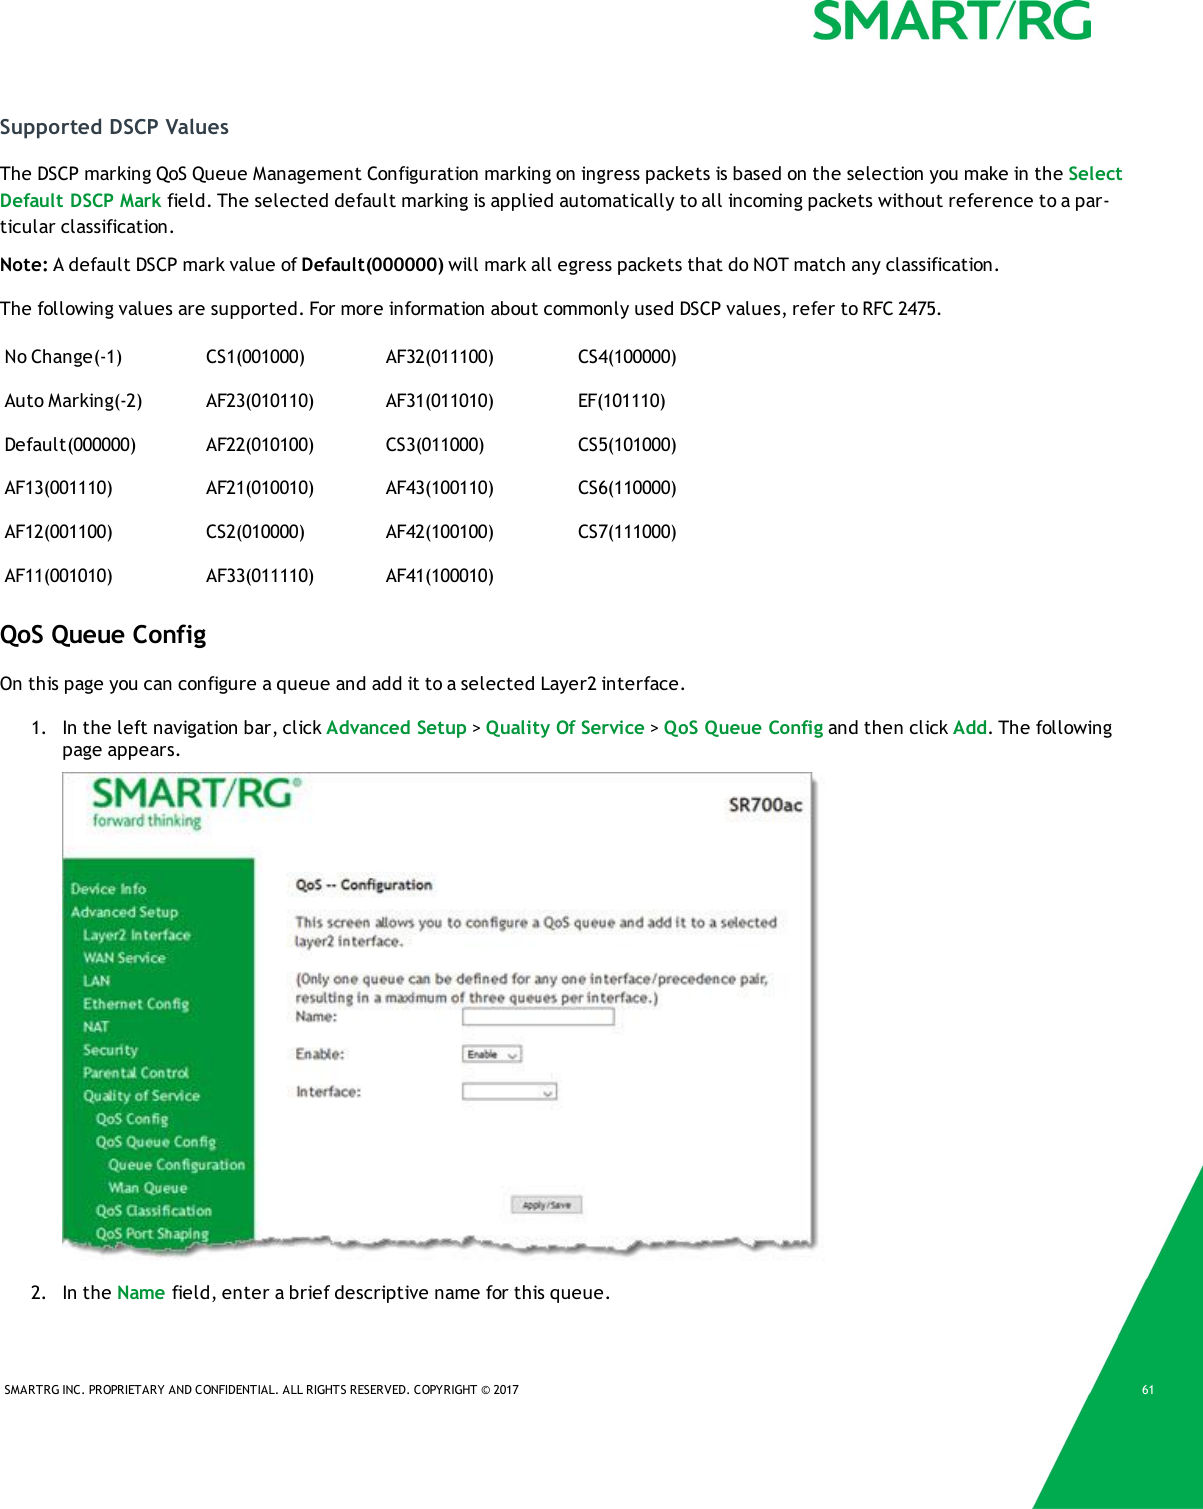 SMARTRG INC. PROPRIETARY AND CONFIDENTIAL. ALL RIGHTS RESERVED. COPYRIGHT © 2017 61Supported DSCP ValuesThe DSCP marking QoS Queue Management Configuration marking on ingress packets is based on the selection you make in the SelectDefault DSCP Mark field. The selected default marking is applied automatically to all incoming packets without reference to a par-ticular classification.Note: A default DSCP mark value of Default(000000) will mark all egress packets that do NOT match any classification.The following values are supported. For more information about commonly used DSCP values, refer to RFC 2475.No Change(-1) CS1(001000) AF32(011100) CS4(100000)Auto Marking(-2) AF23(010110) AF31(011010) EF(101110)Default(000000) AF22(010100) CS3(011000) CS5(101000)AF13(001110) AF21(010010) AF43(100110) CS6(110000)AF12(001100) CS2(010000) AF42(100100) CS7(111000)AF11(001010) AF33(011110) AF41(100010)QoS Queue ConfigOn this page you can configure a queue and add it to a selected Layer2 interface.1. In the left navigation bar, click Advanced Setup &gt;Quality Of Service &gt;QoS Queue Config and then click Add. The followingpage appears.2. In the Name field, enter a brief descriptive name for this queue.